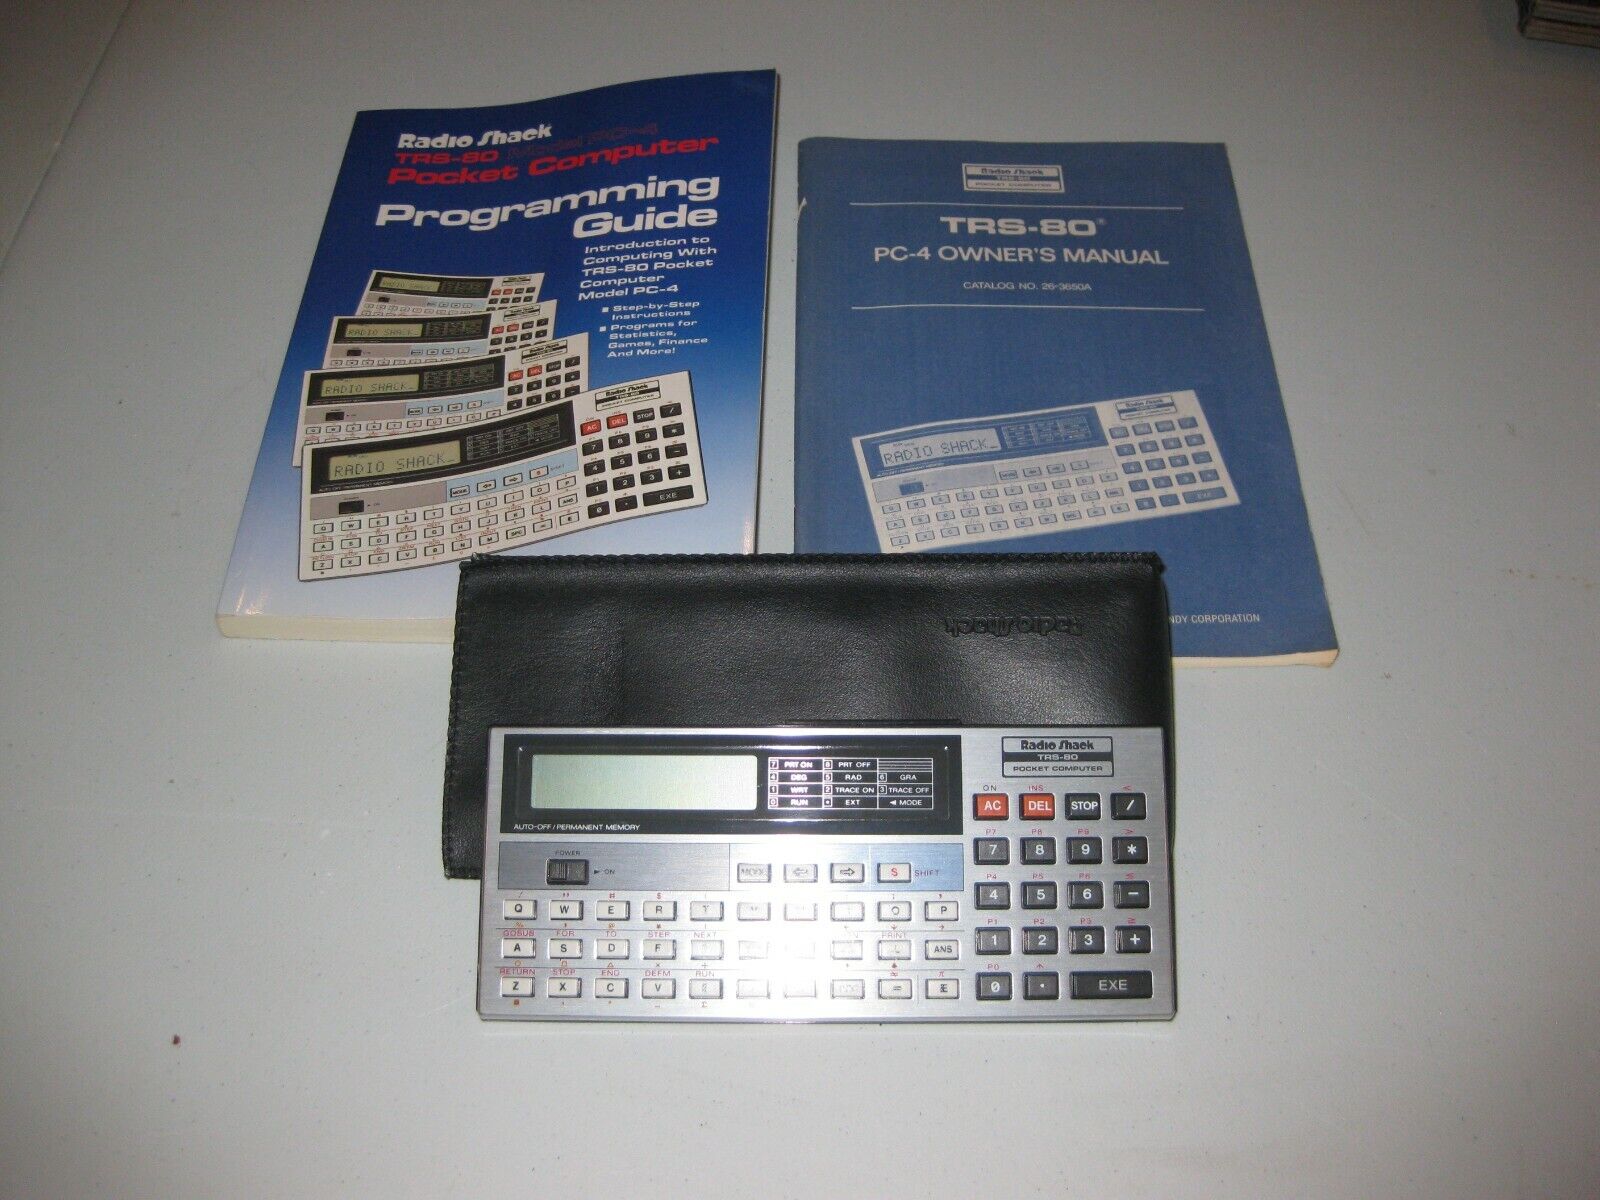 TRS-80 Model PC-4 Radio Shack Pocket Computer with manual and programming guide